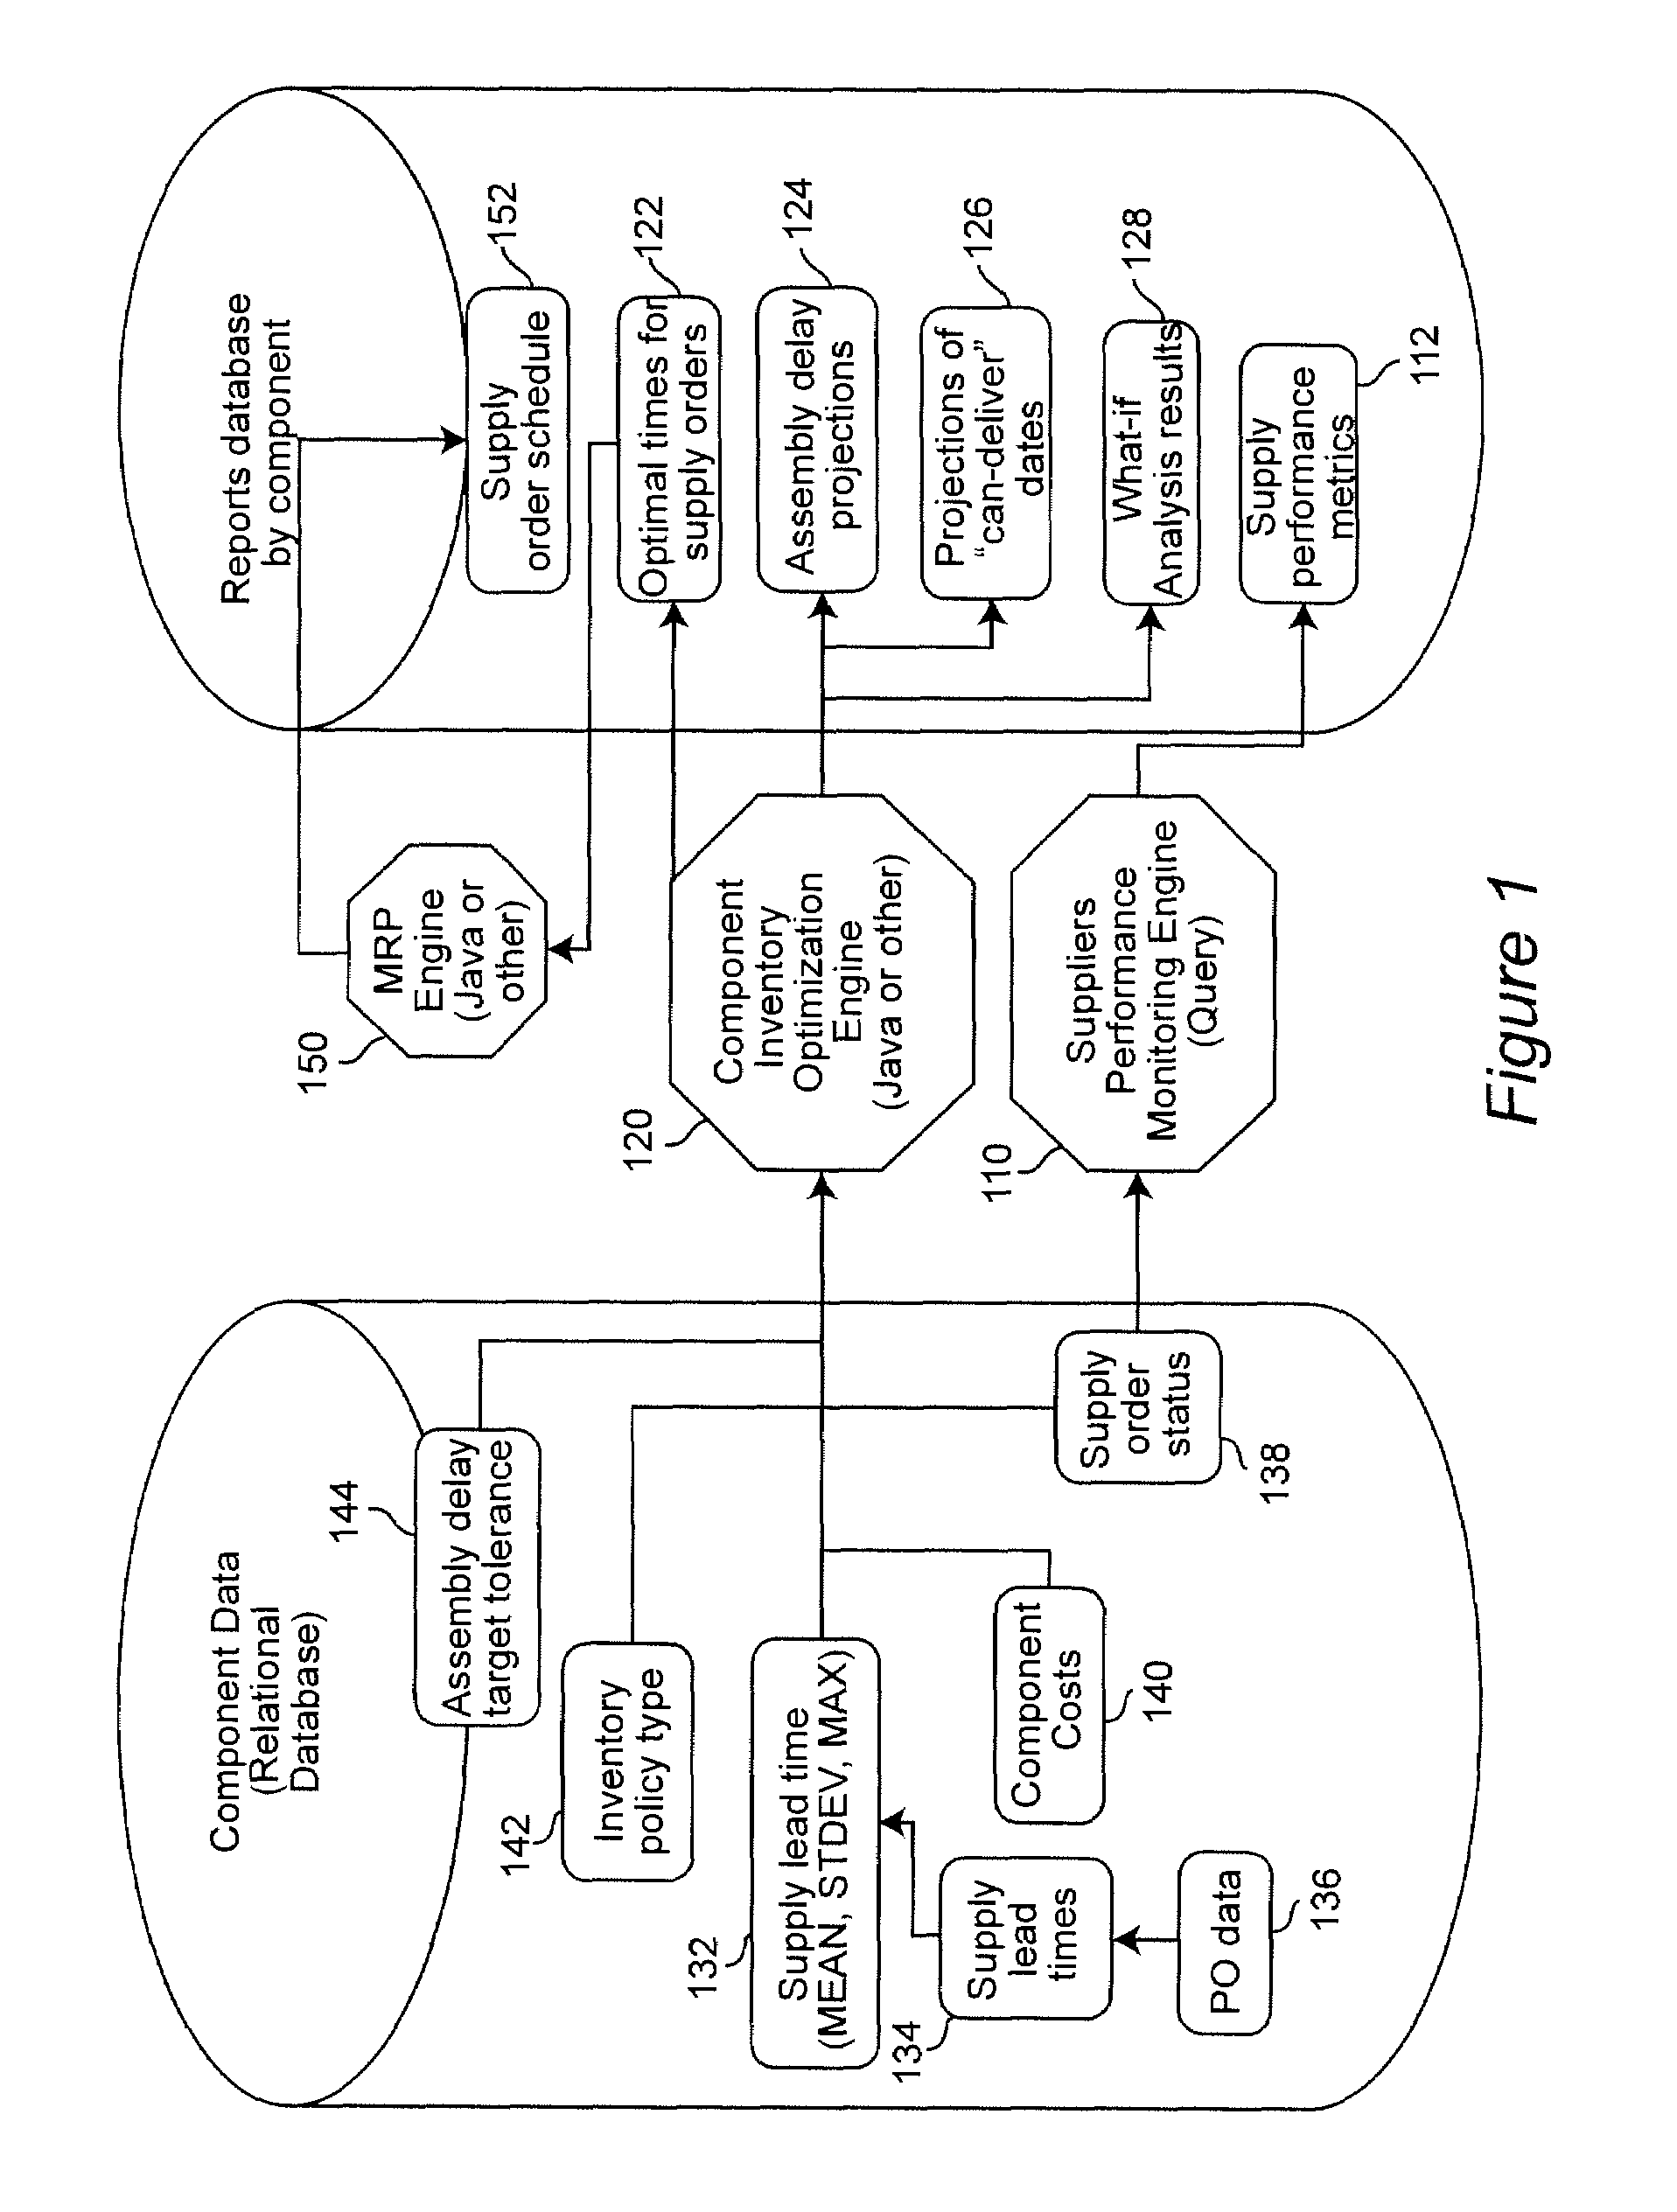 System and process for supply management for the assembly of expensive products